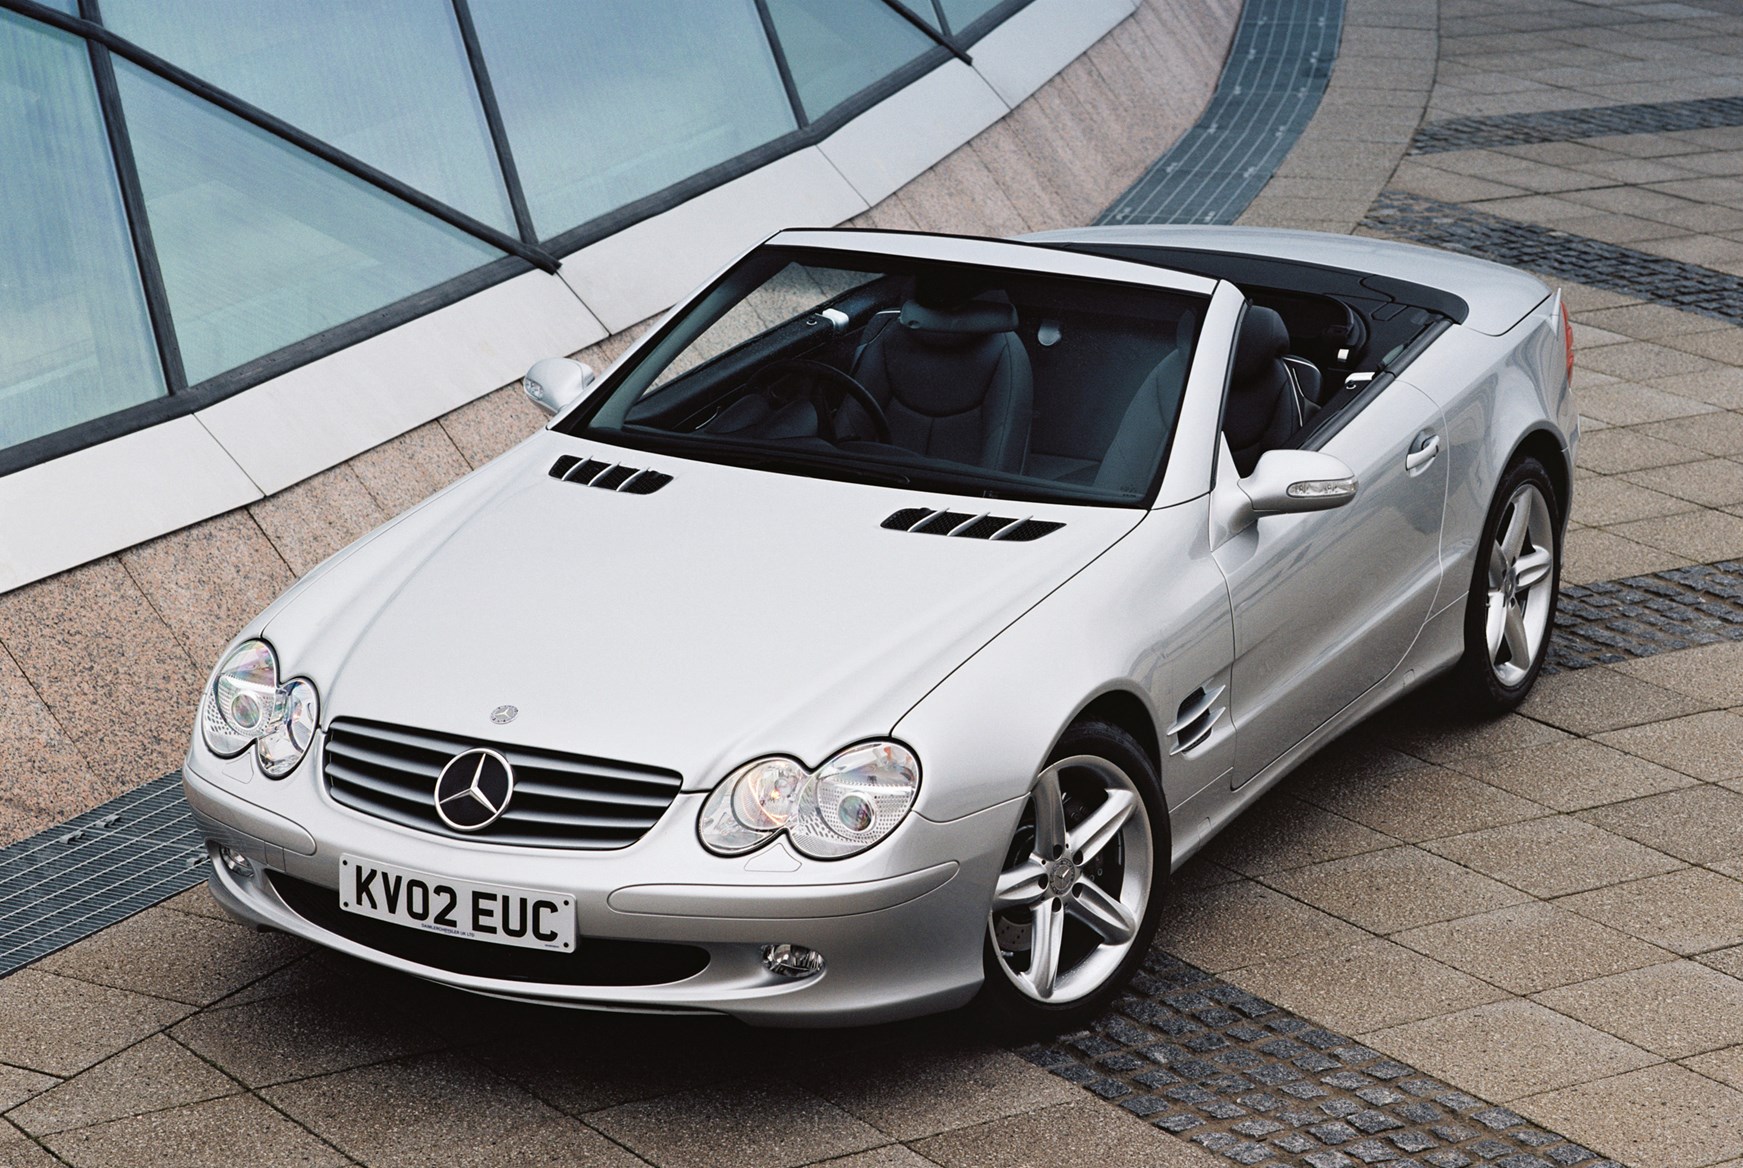 Used Mercedes-Benz SL-Class Convertible (2002 - 2011 ...